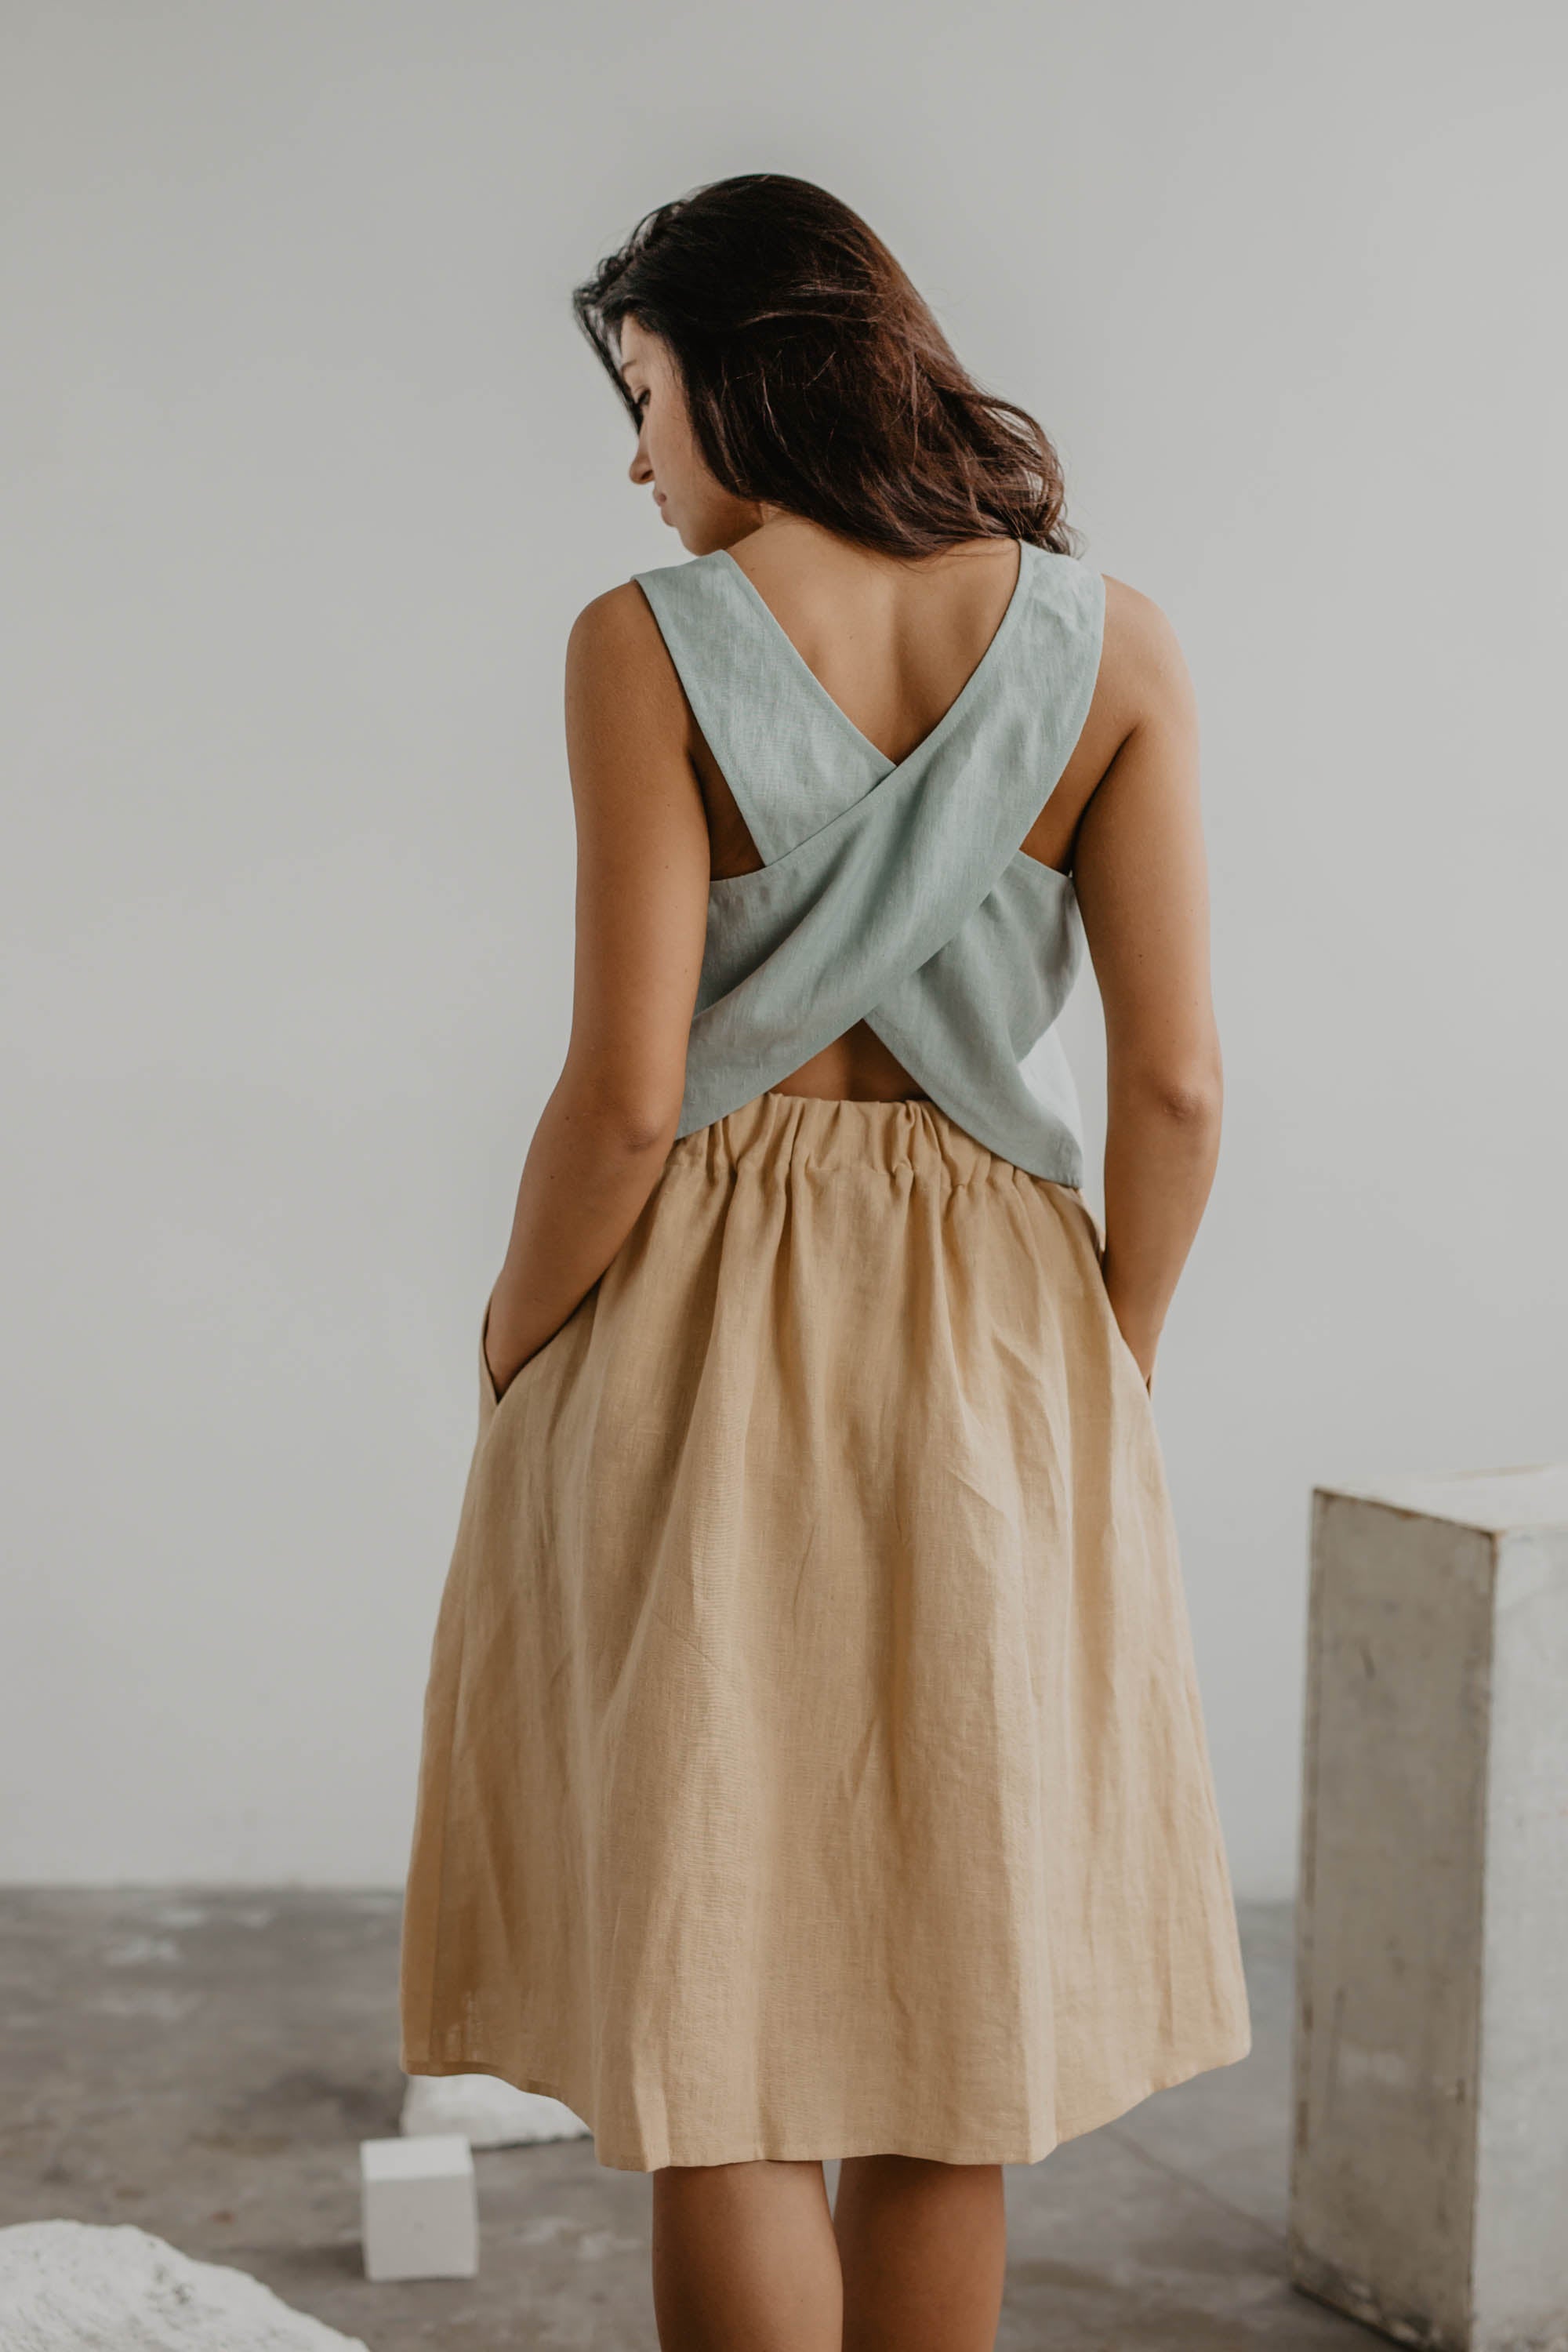 Back Of Woman Wearing A Linen Beige Skirt With Buttons And Sage Green Top By AmourLinen